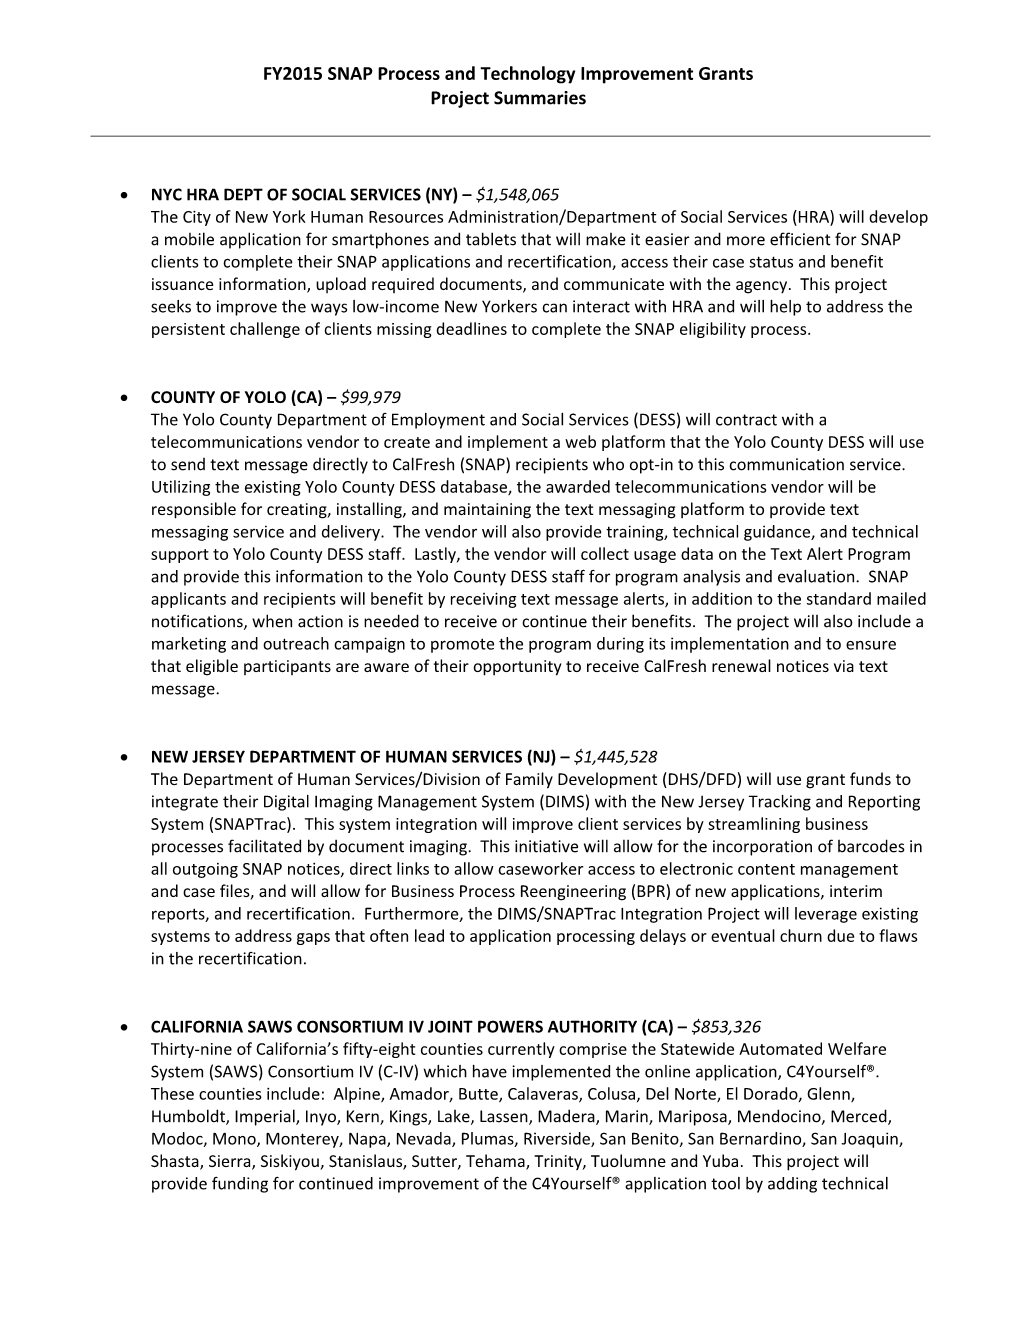 Fy2015 Snap Process and Technology Improvement Grant Summaries